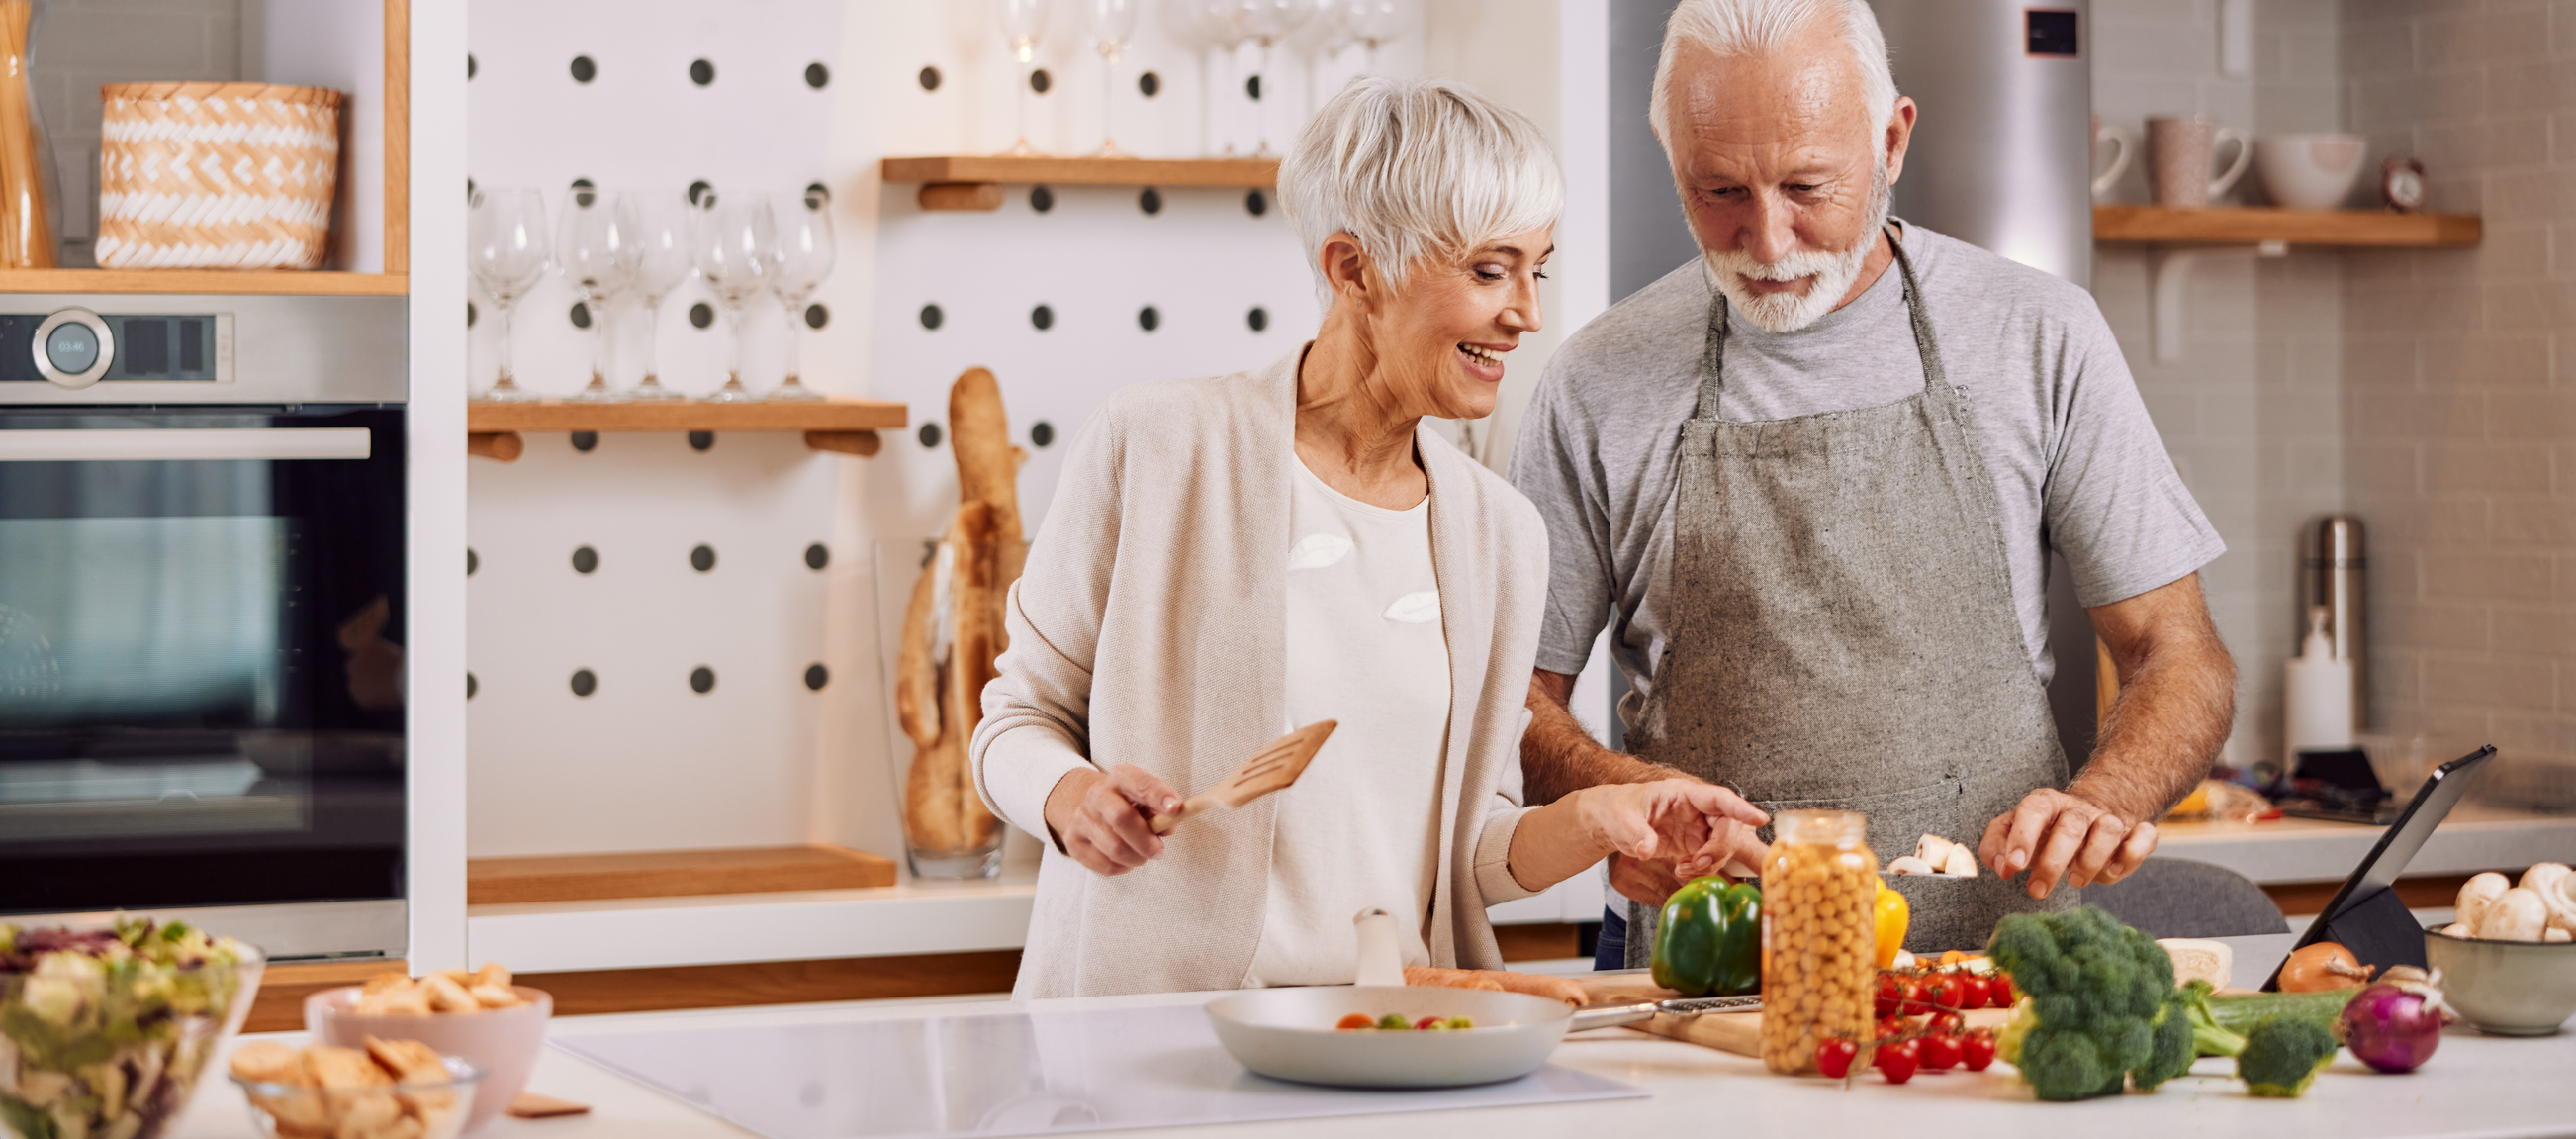 Senior couple chopping food in kitchen